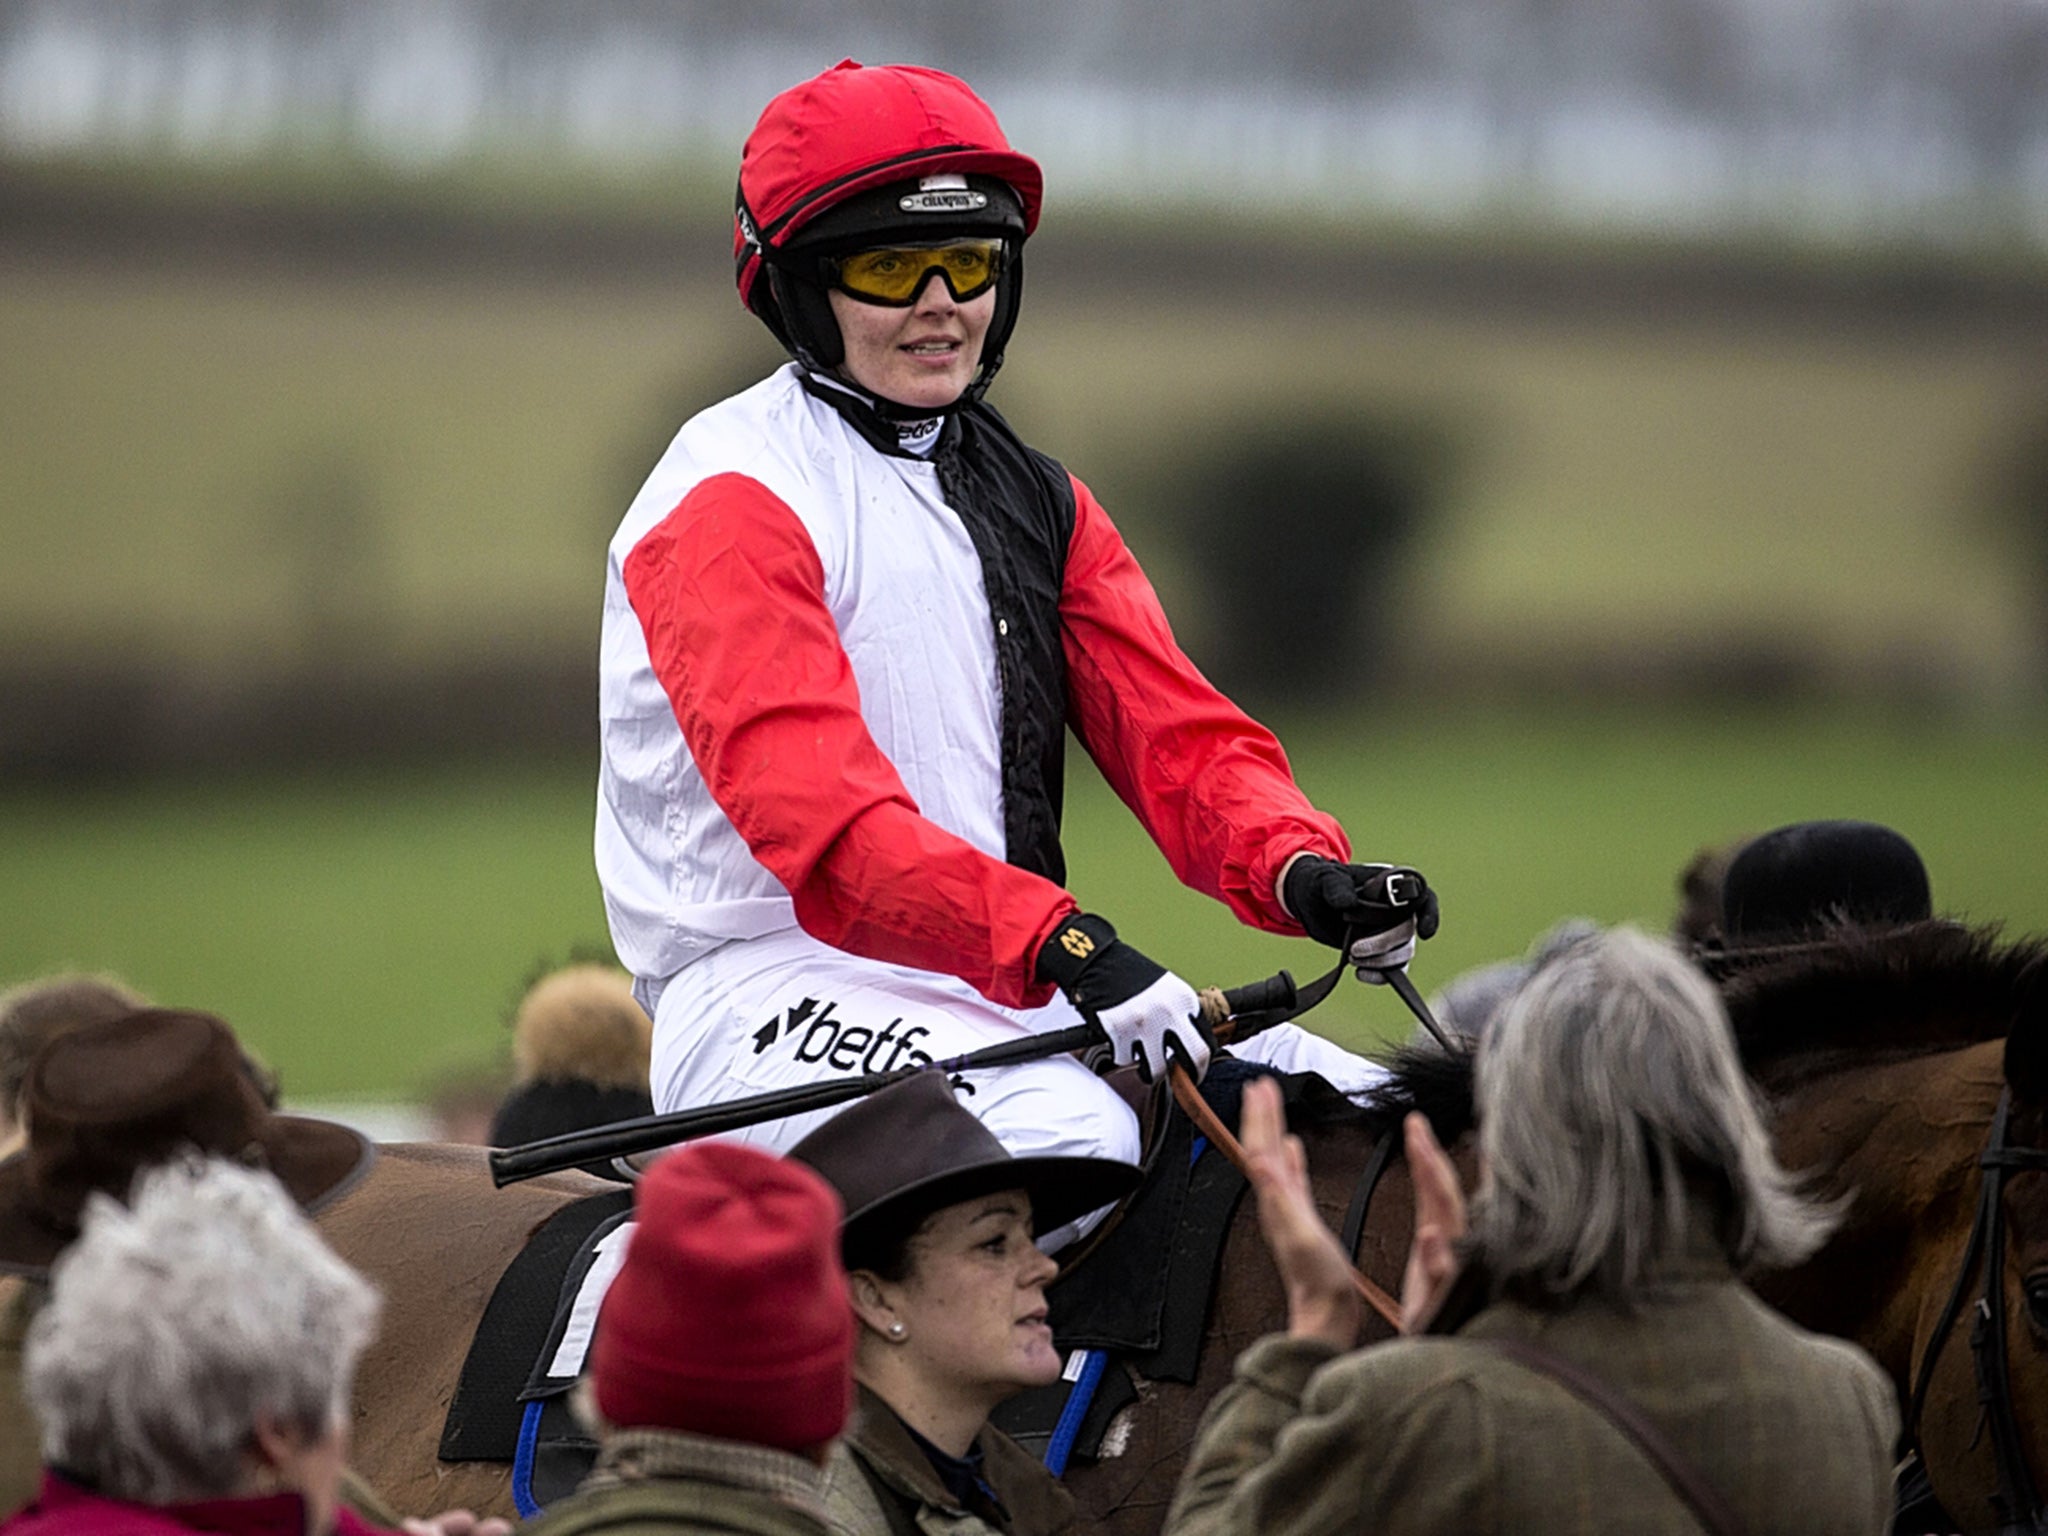 Opinion is divided on whether the former Olympic cyclist Victoria Pendleton should be riding at Cheltenham